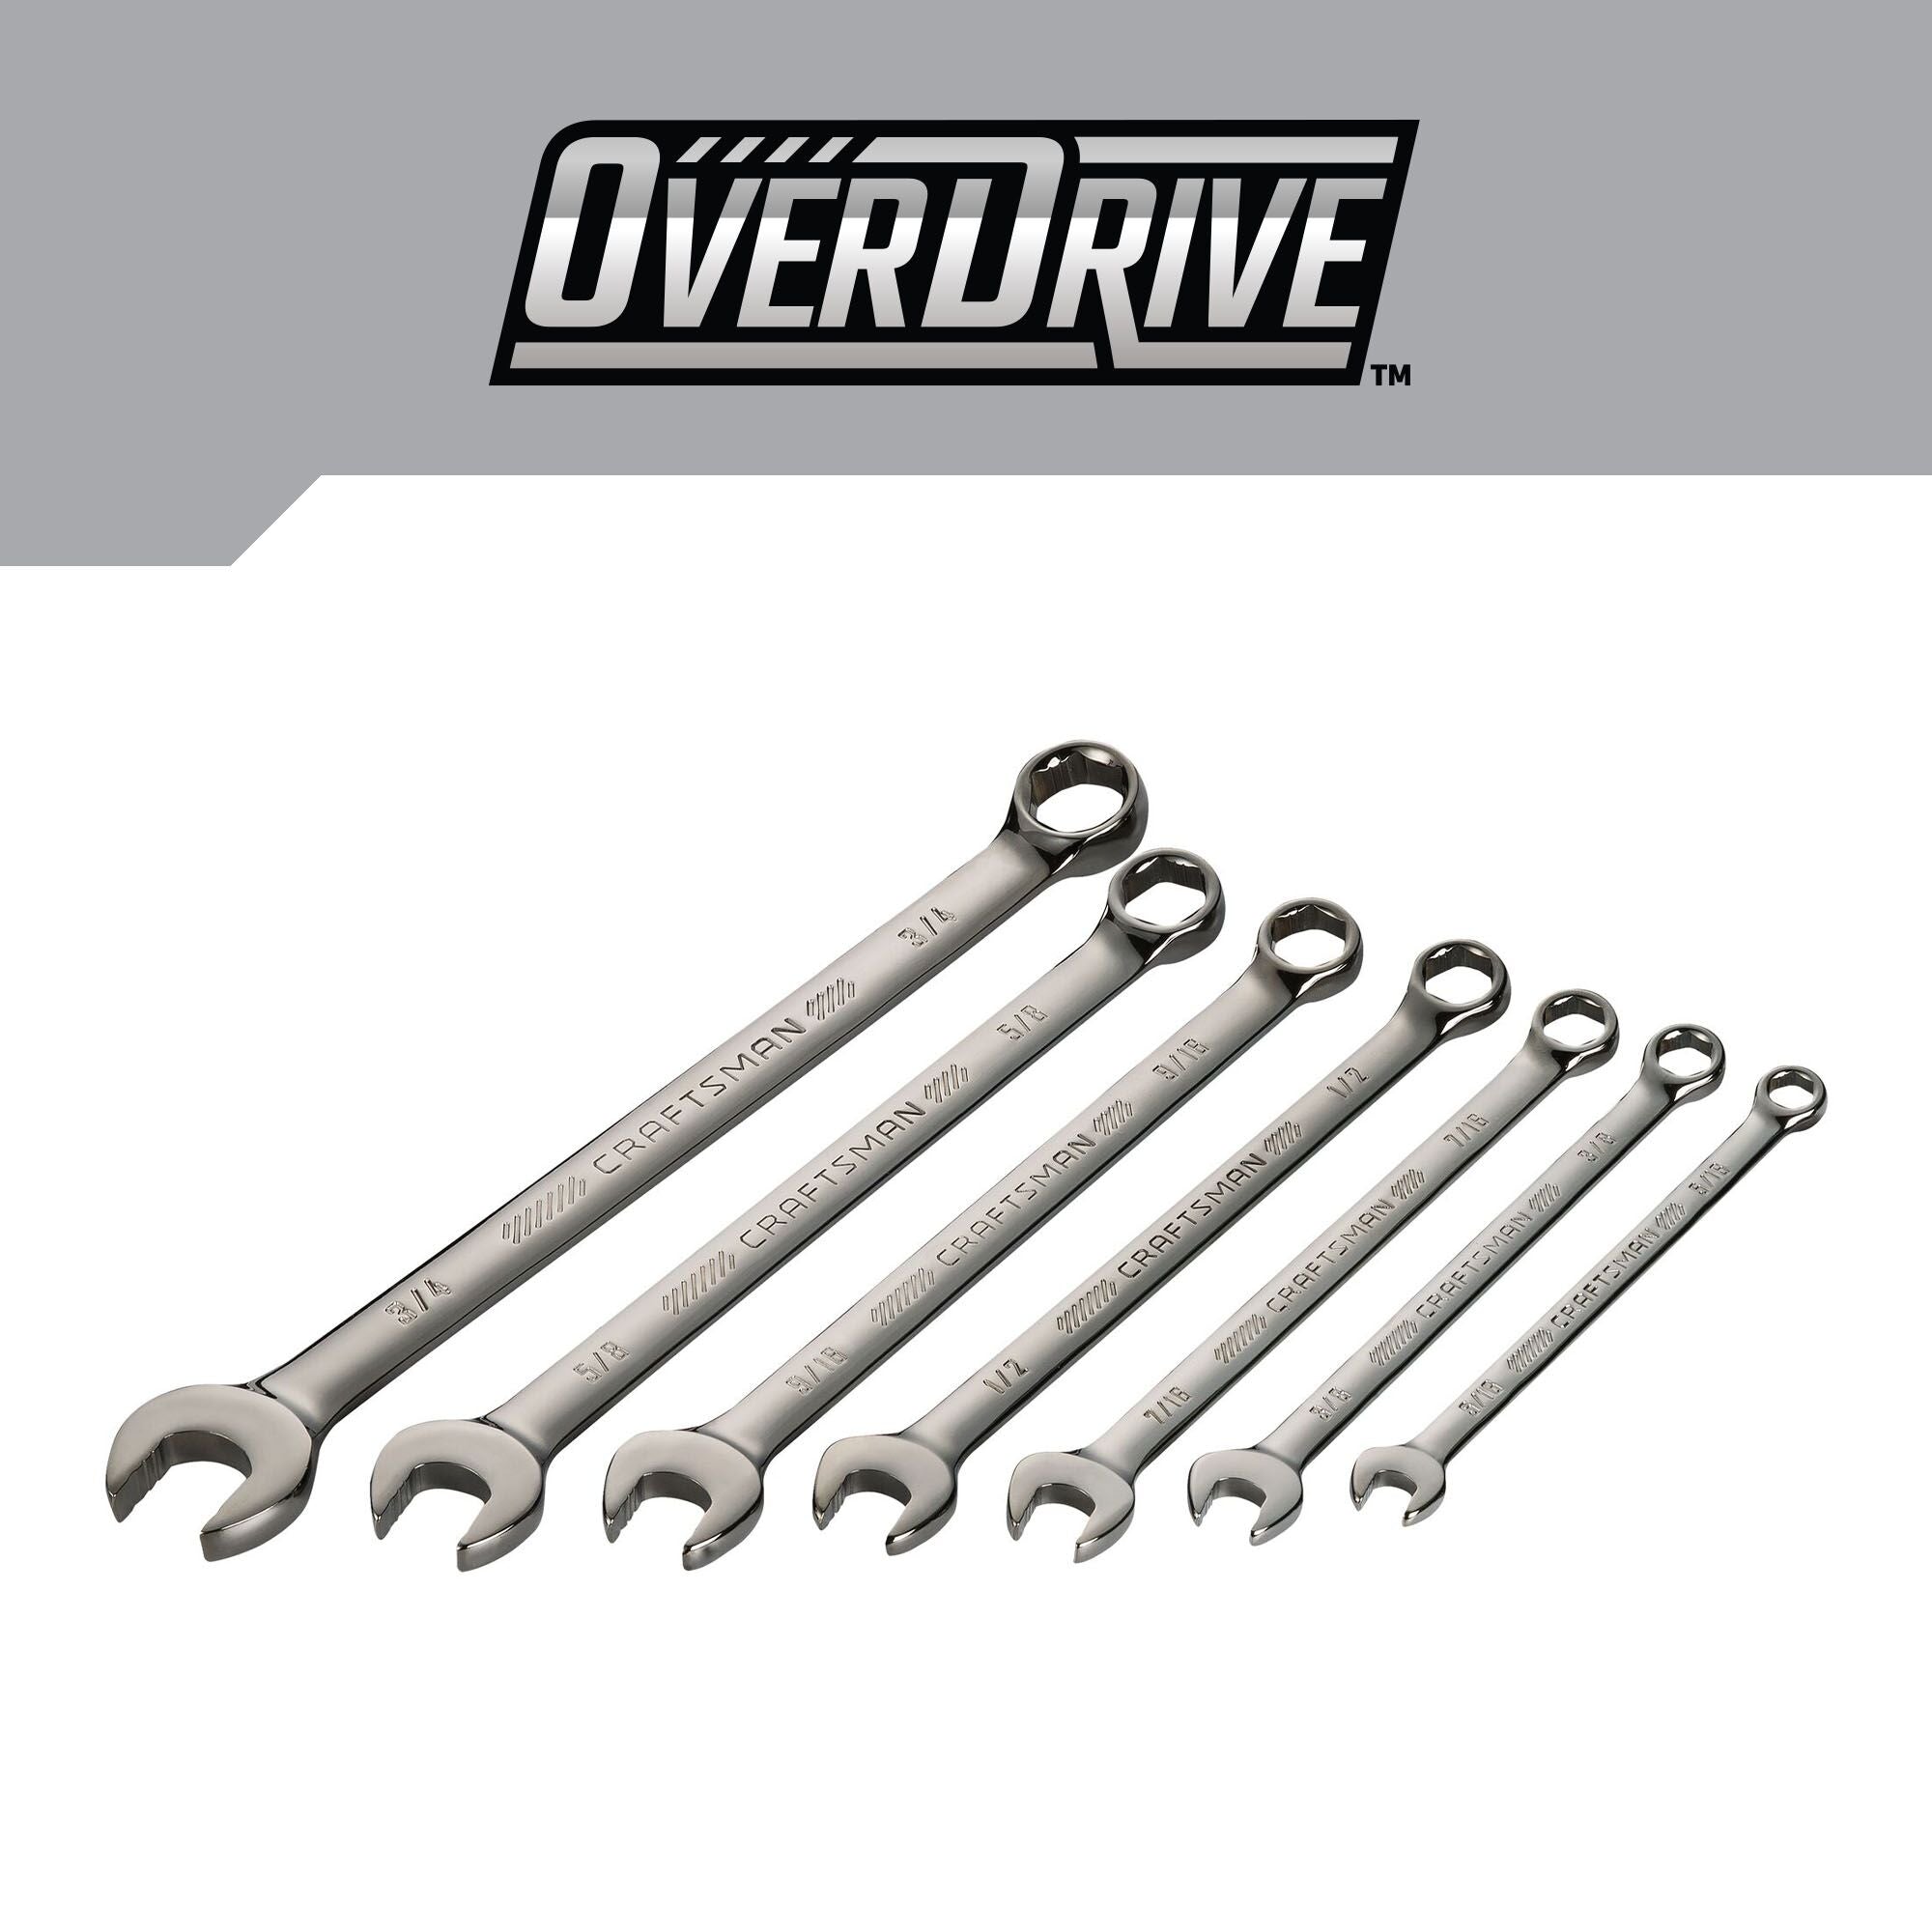 CRAFTSMAN OVERDRIVE 7 PIECE WRENCH SET product on white background